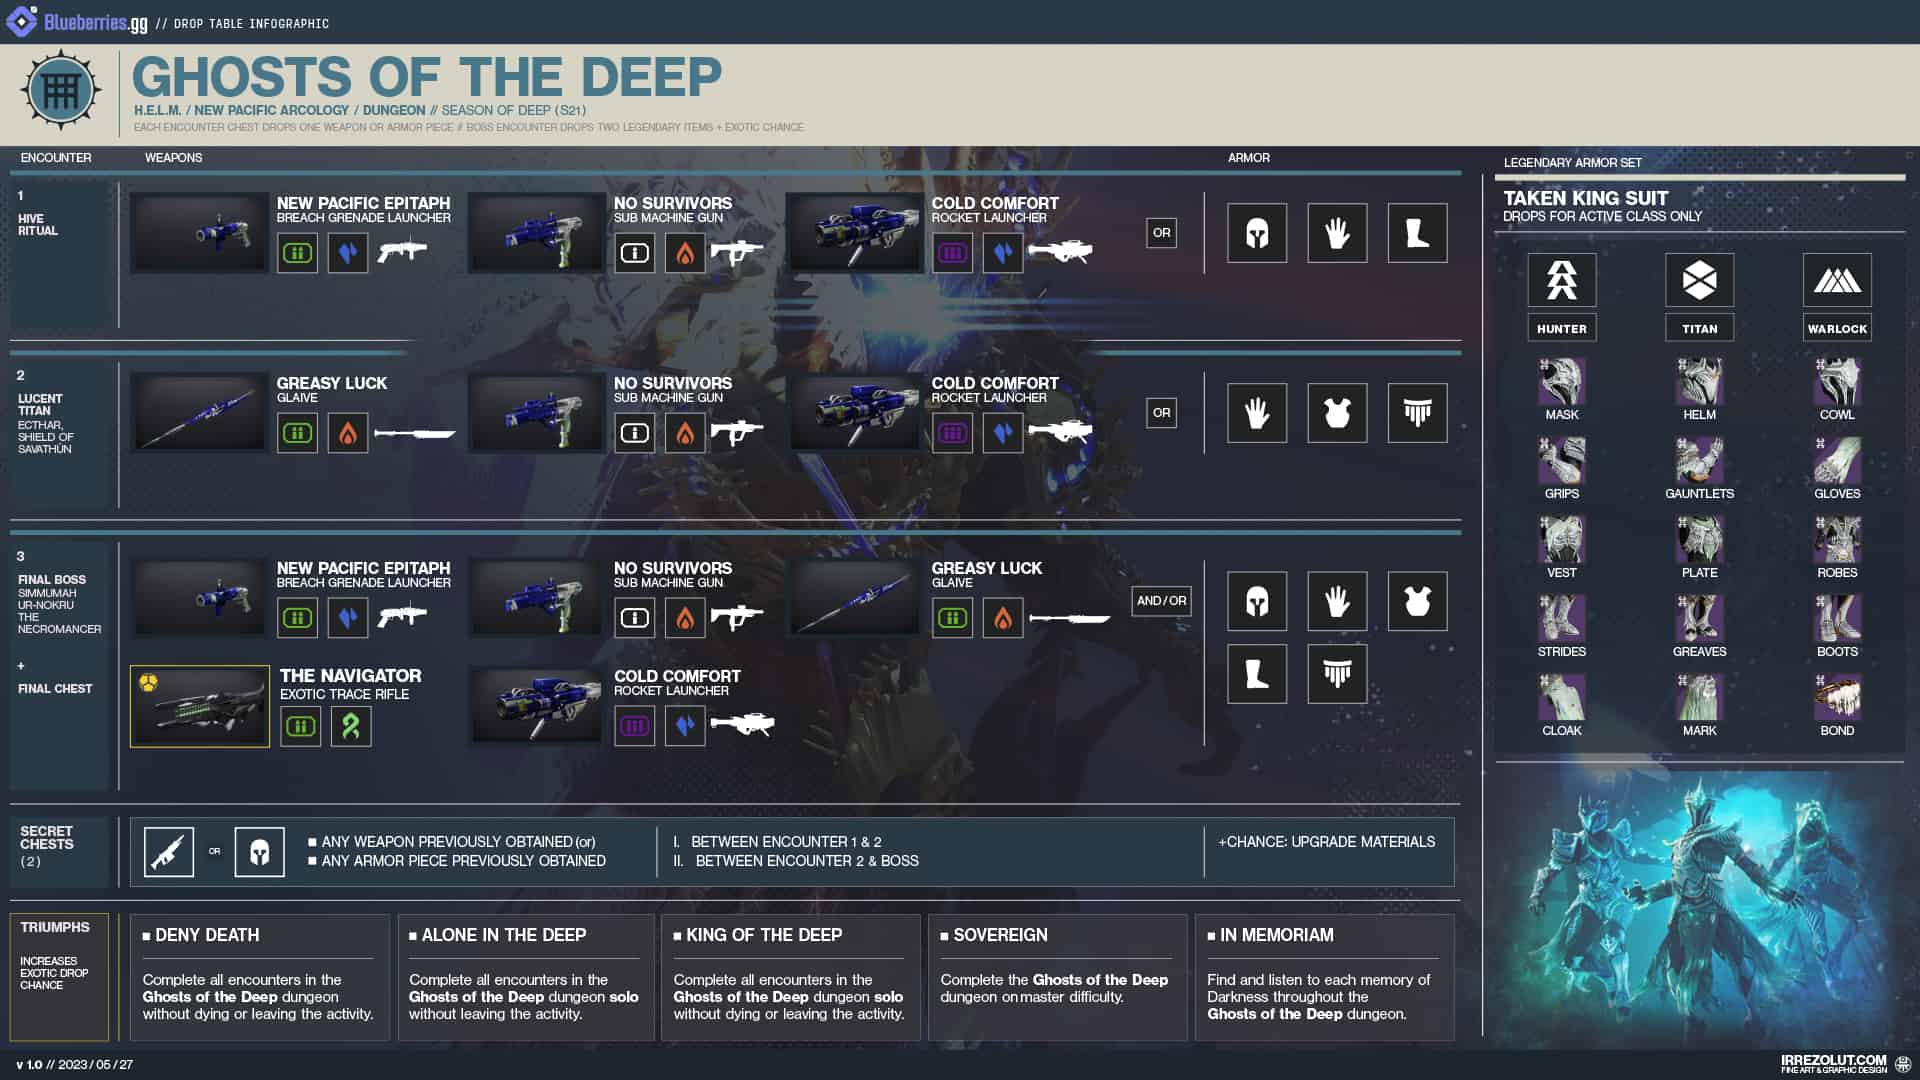 Ghost of the Deep Loot Table Infographic V2